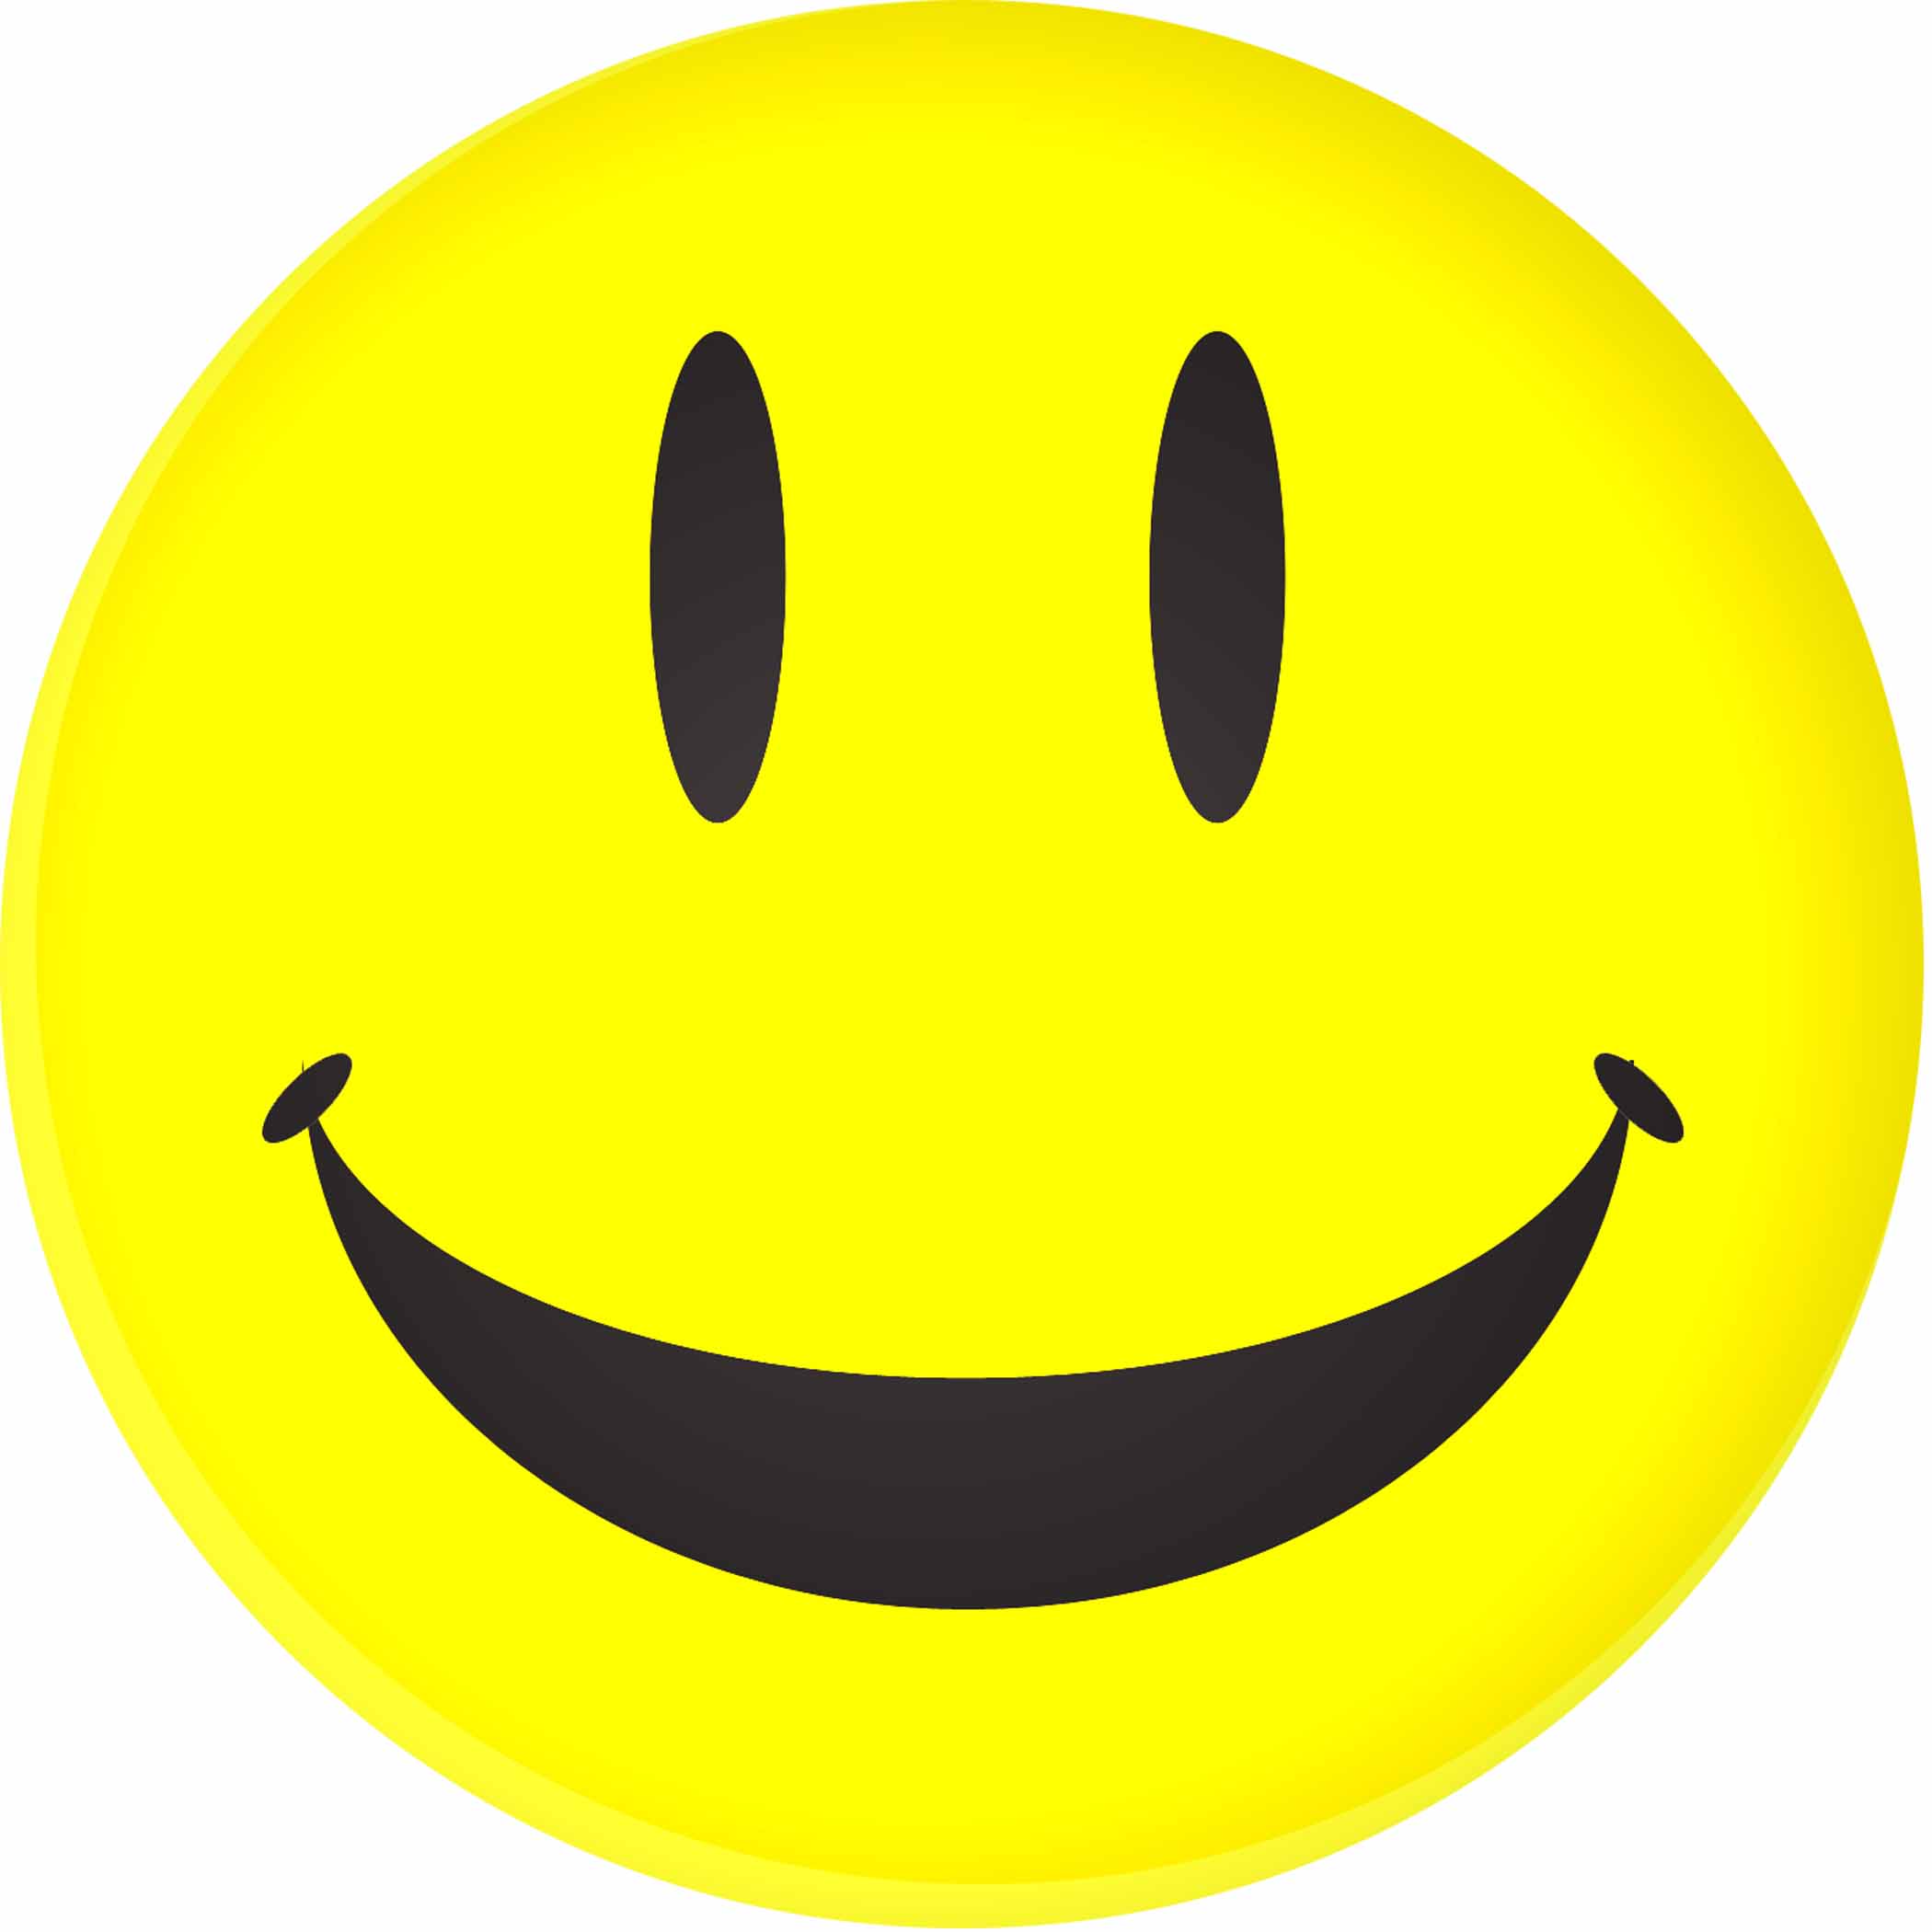 Smiley face clip art images f